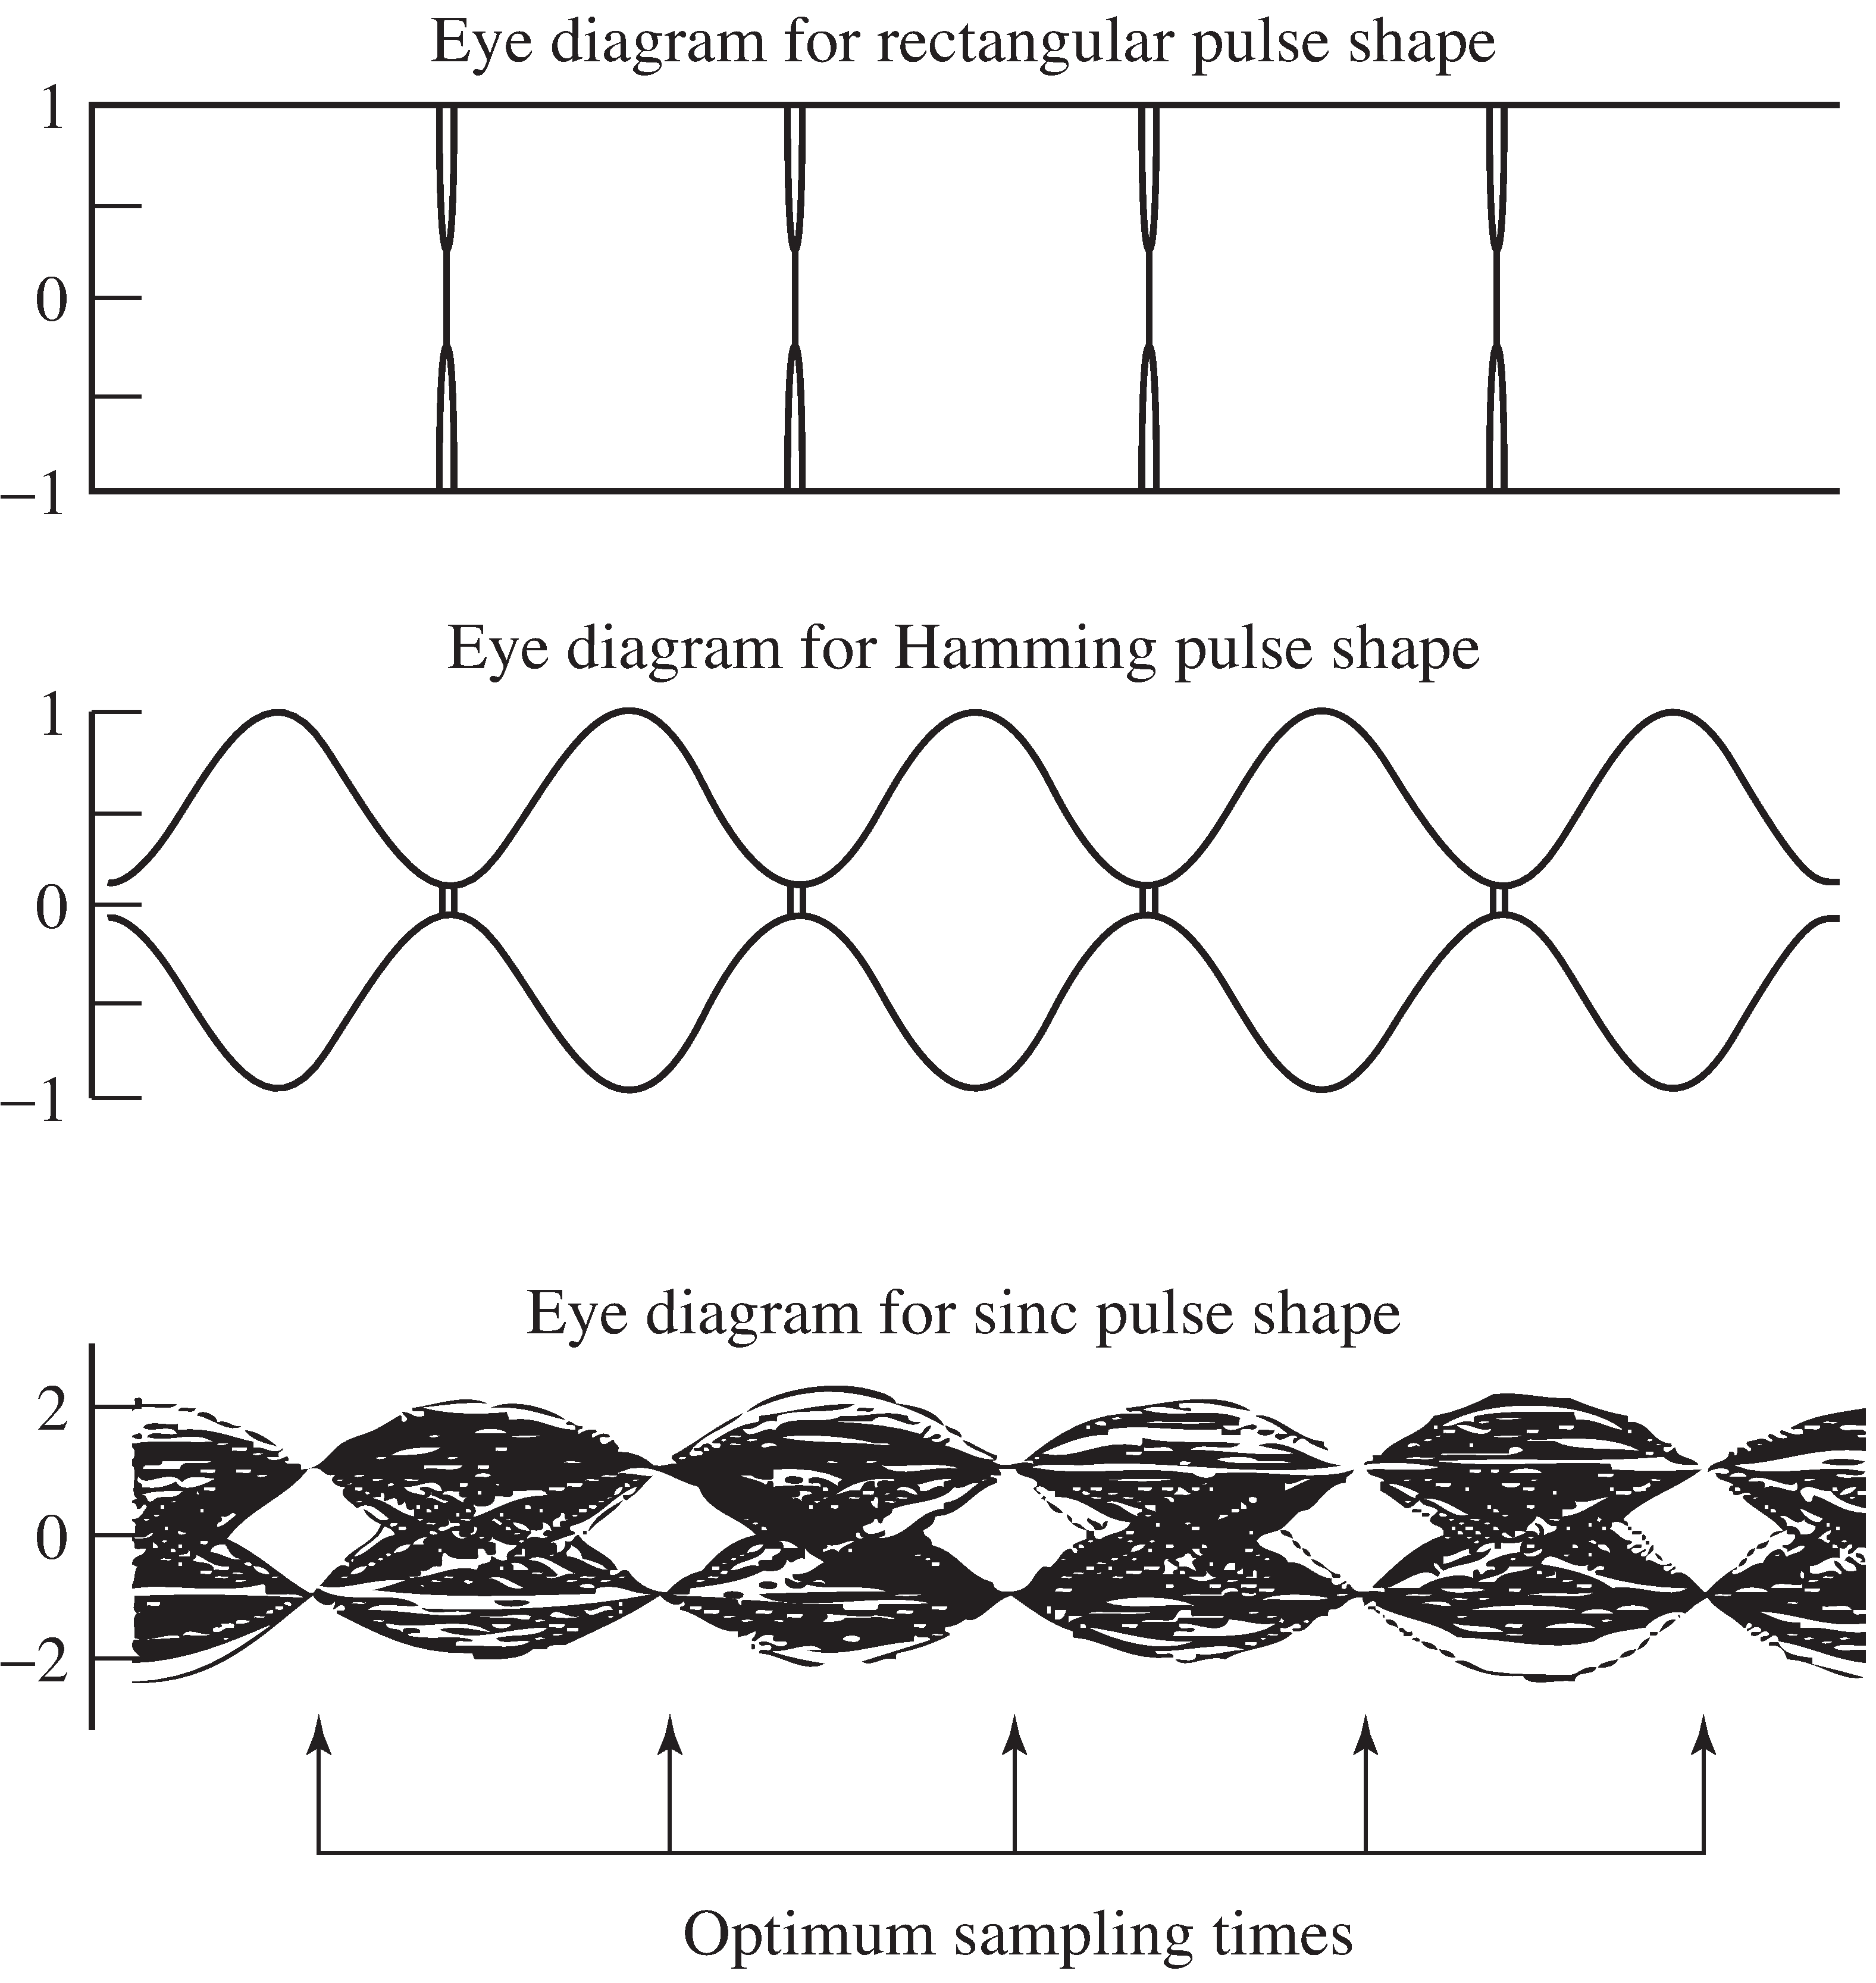 Eye diagrams for rectangular, Hamming, and sinc pulse shapes with binary data.